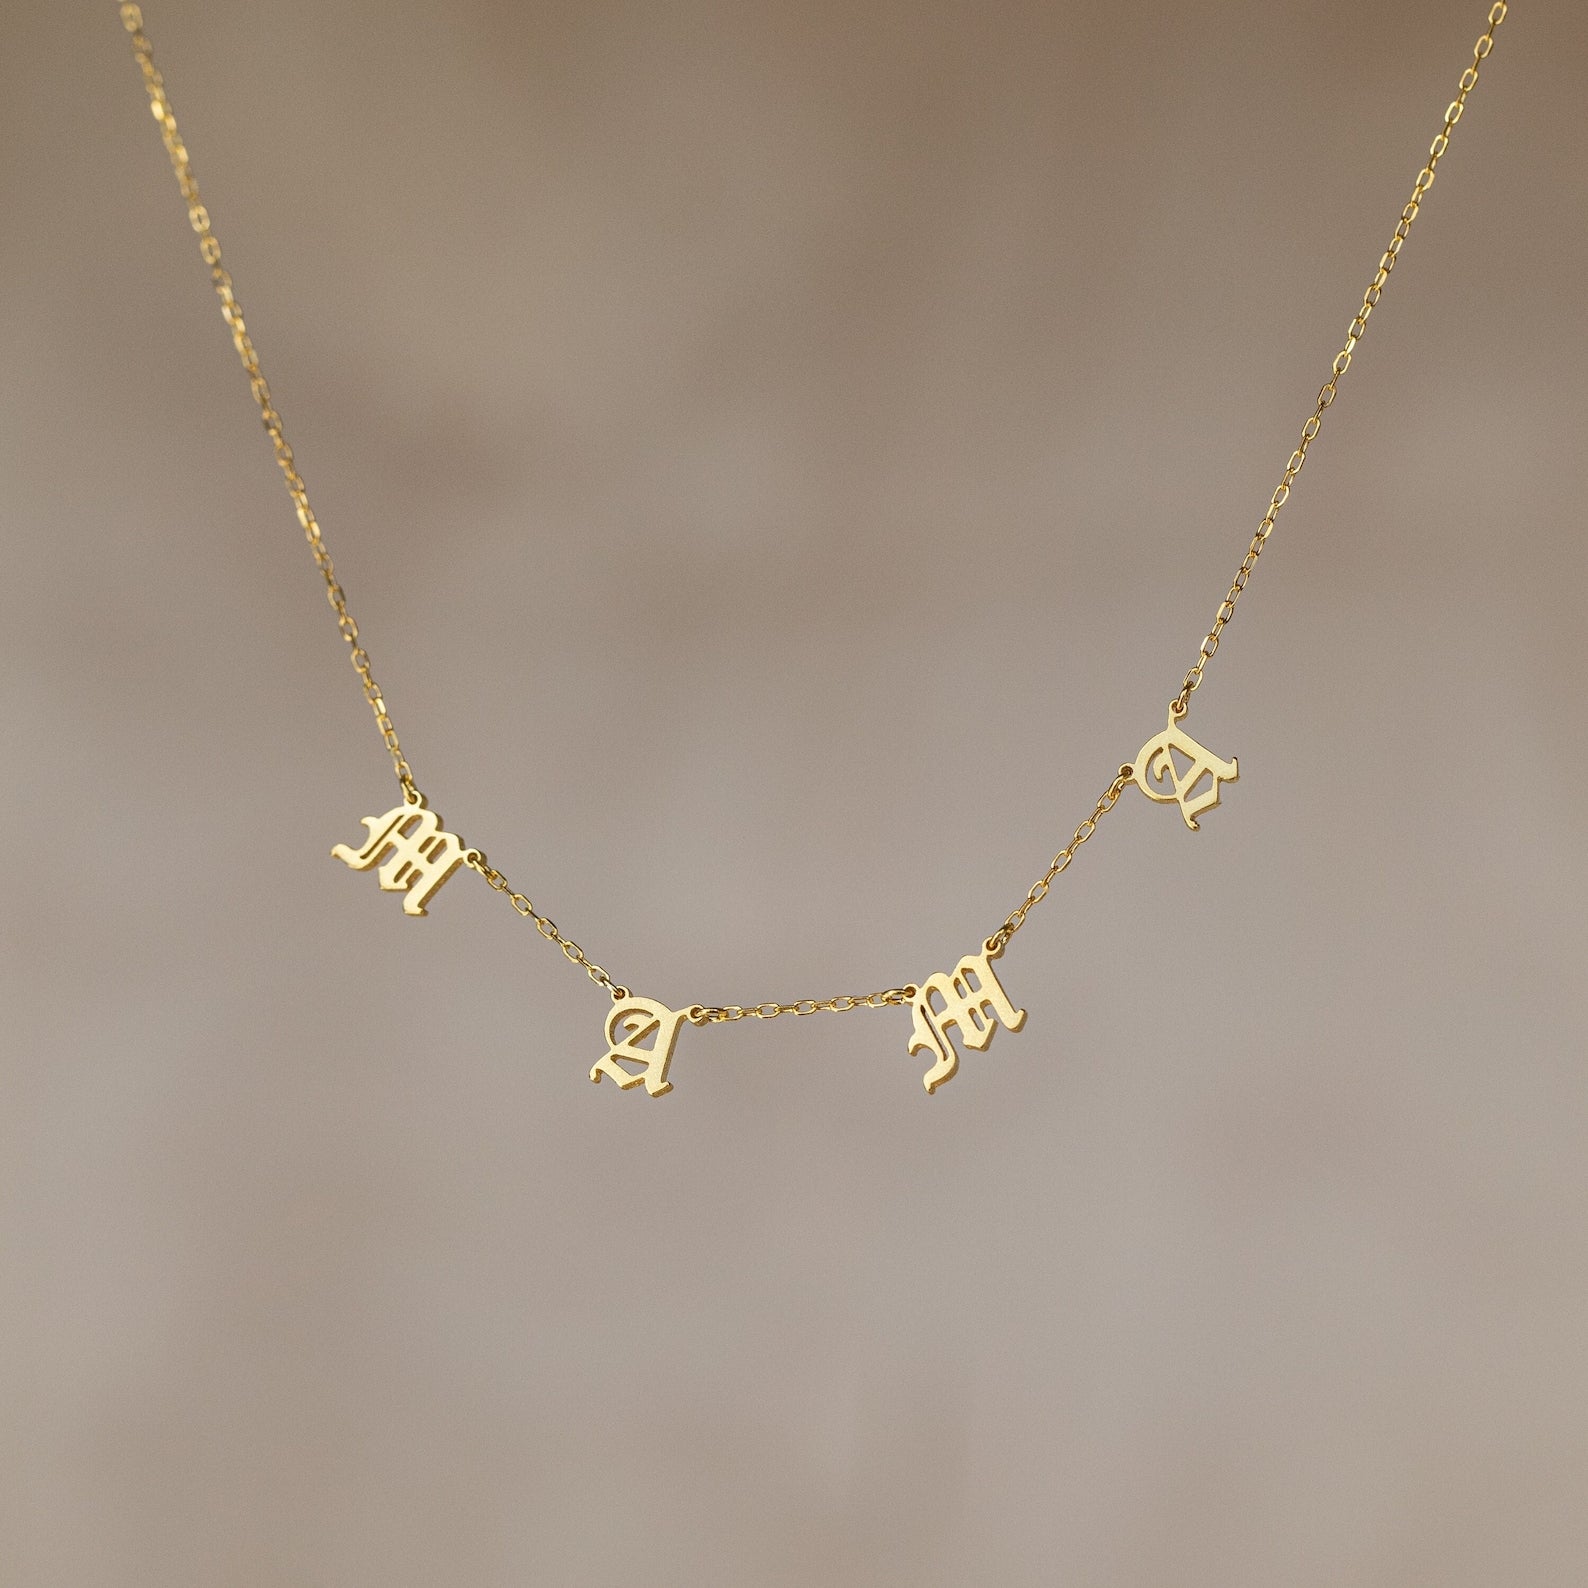 Gothic necklace Old English font necklace gold custom necklace initial  necklace personalized necklace Gothic necklaces for